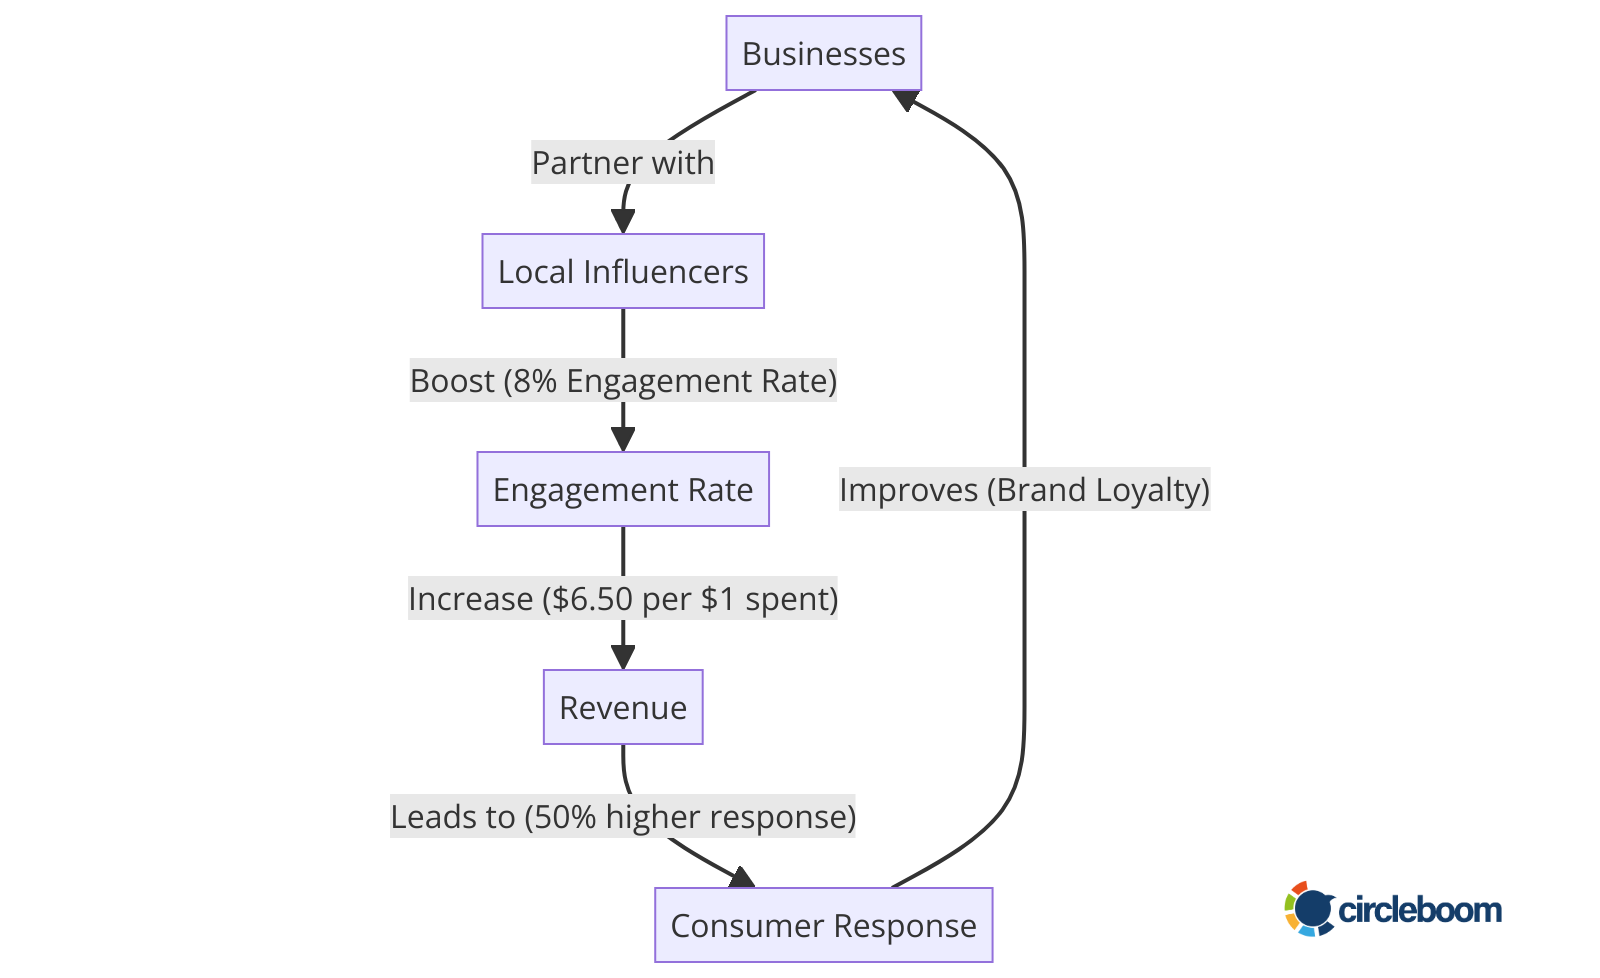 Diagram showing the effect of local influencers on businesses